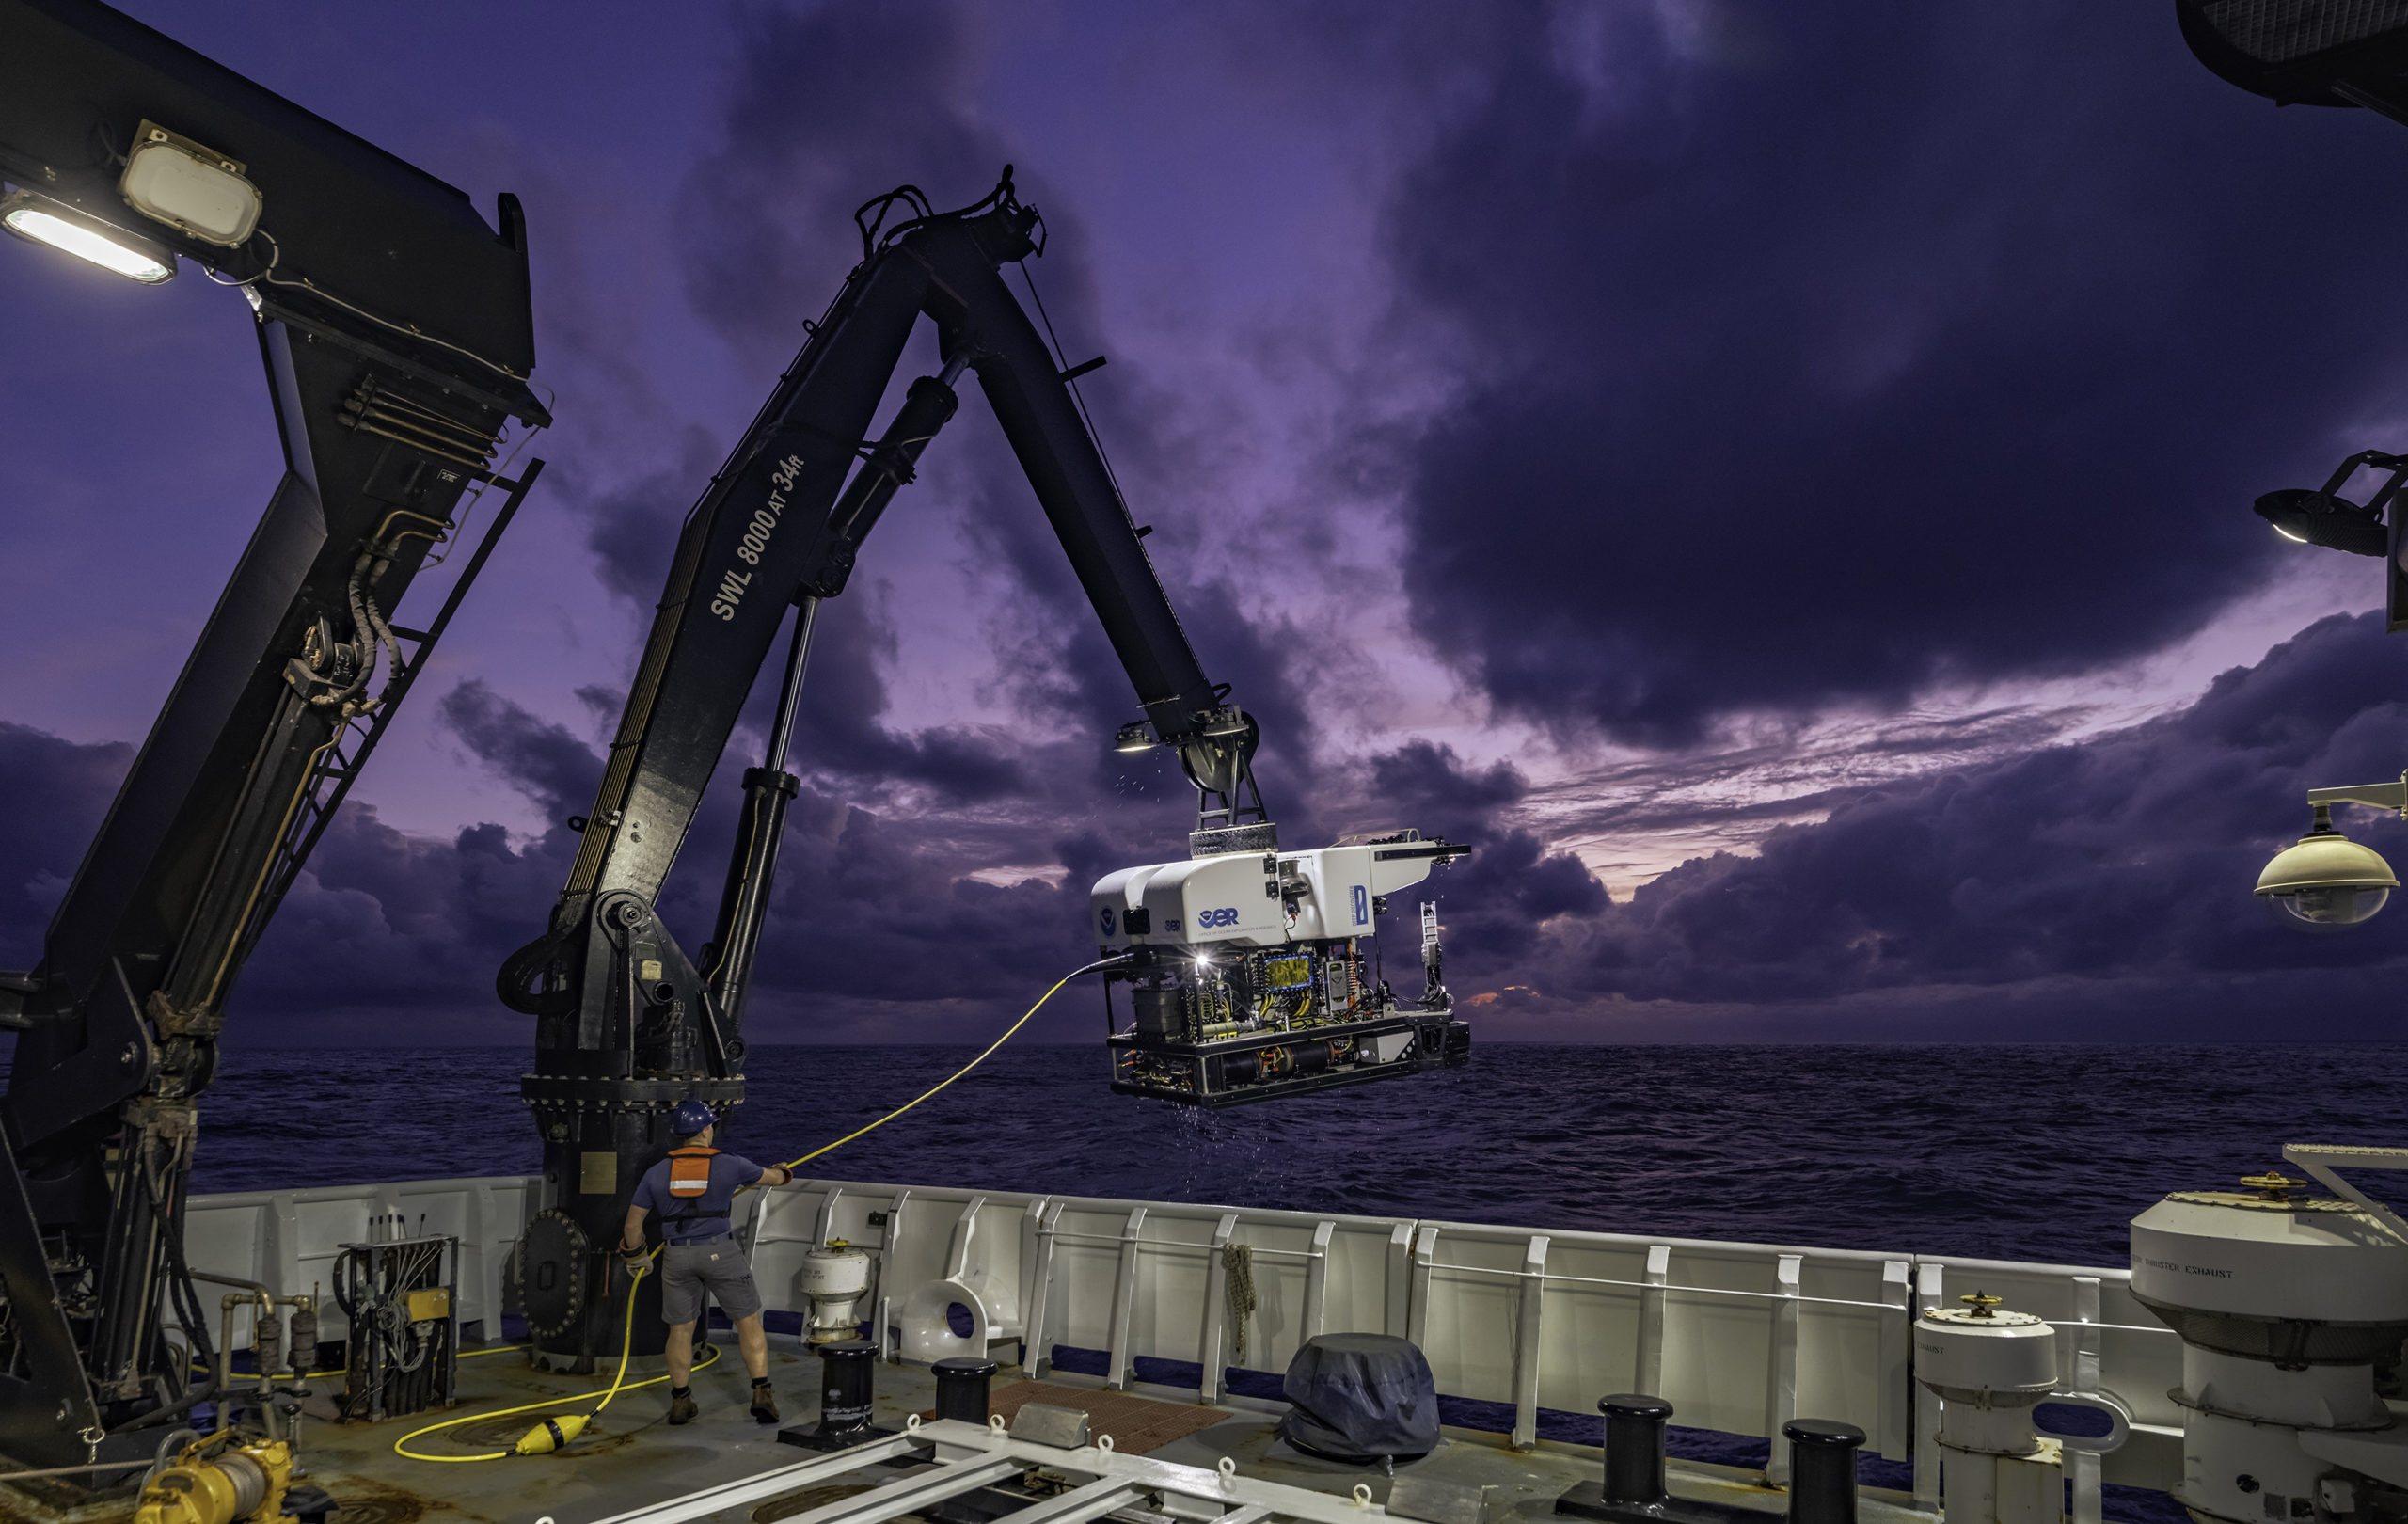 The Challenges of ROV Operations at Sea